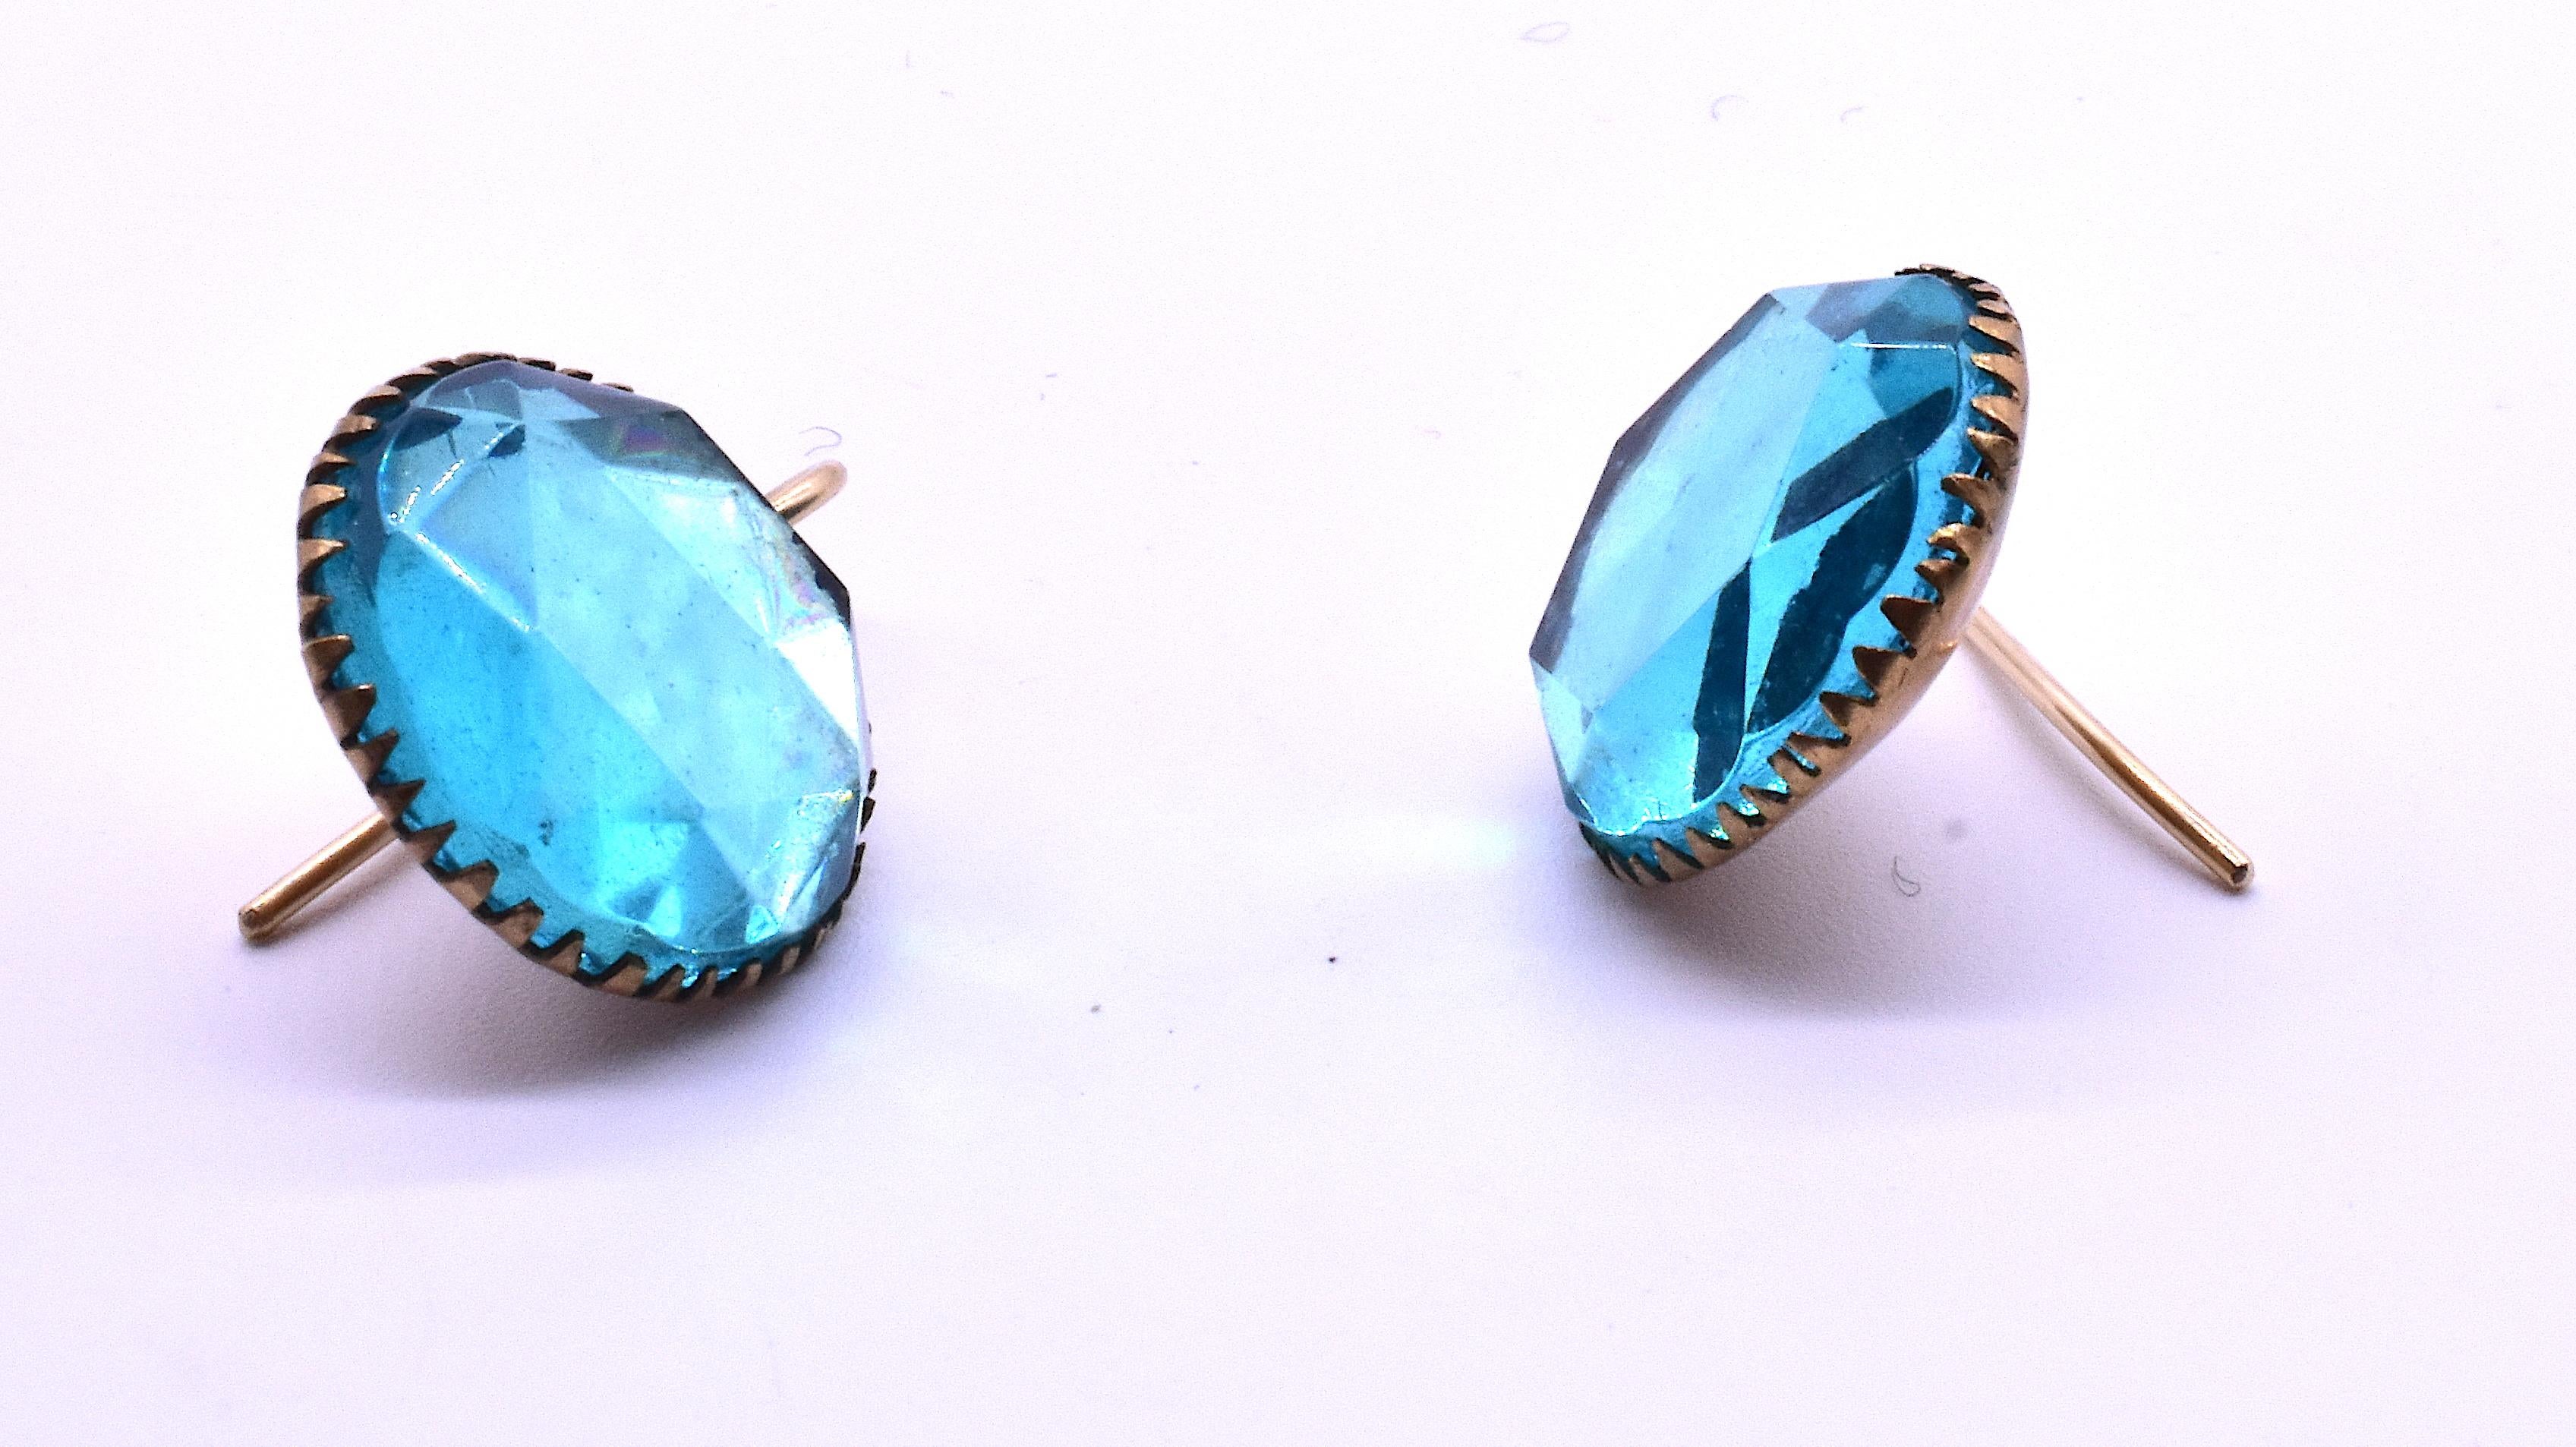 Lovely pair of Vauxhall glass aqua colored glass earrings set on metal. The Vauxhall glass Company manufactured mirror glass in the 19th century and in a burst of innovation one can only behold with astonishment today, they employed jewelry artisans